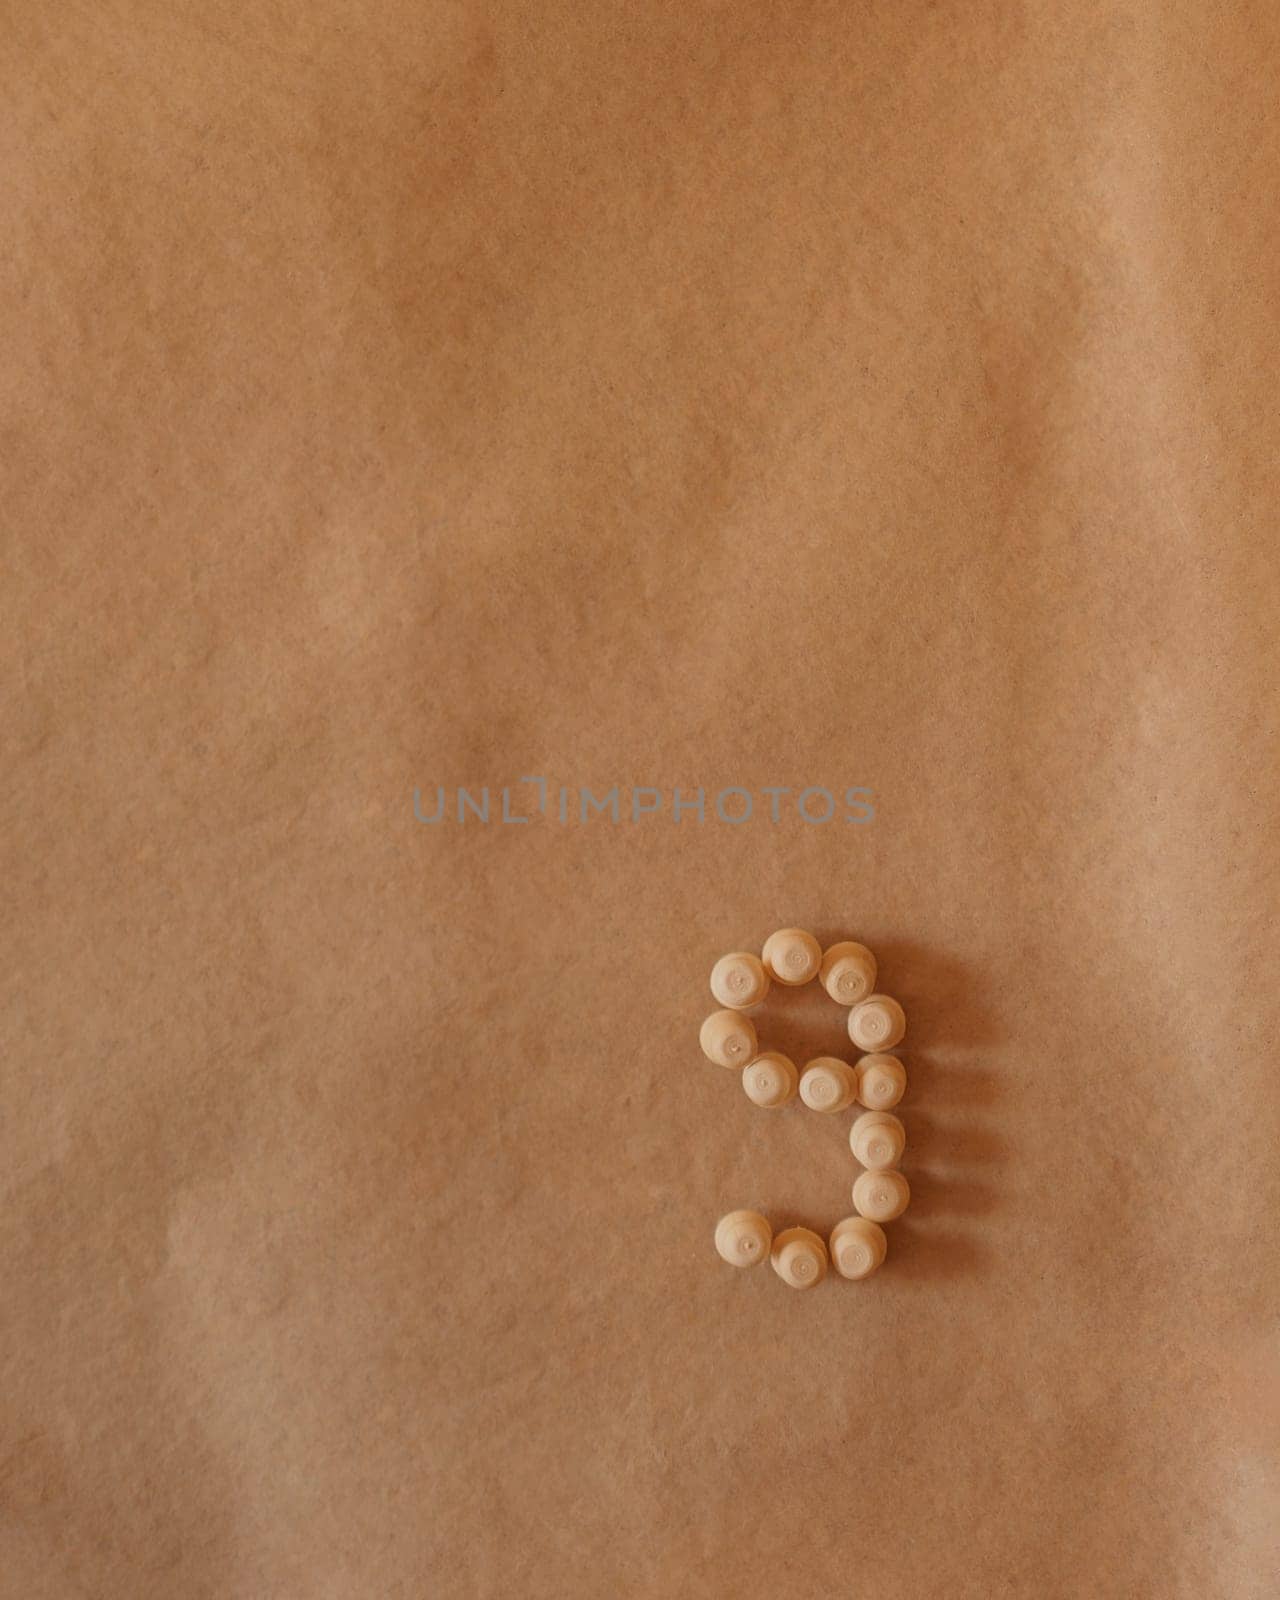 A minimalist composition of wooden pins forming the number nine on a brown background by apavlin